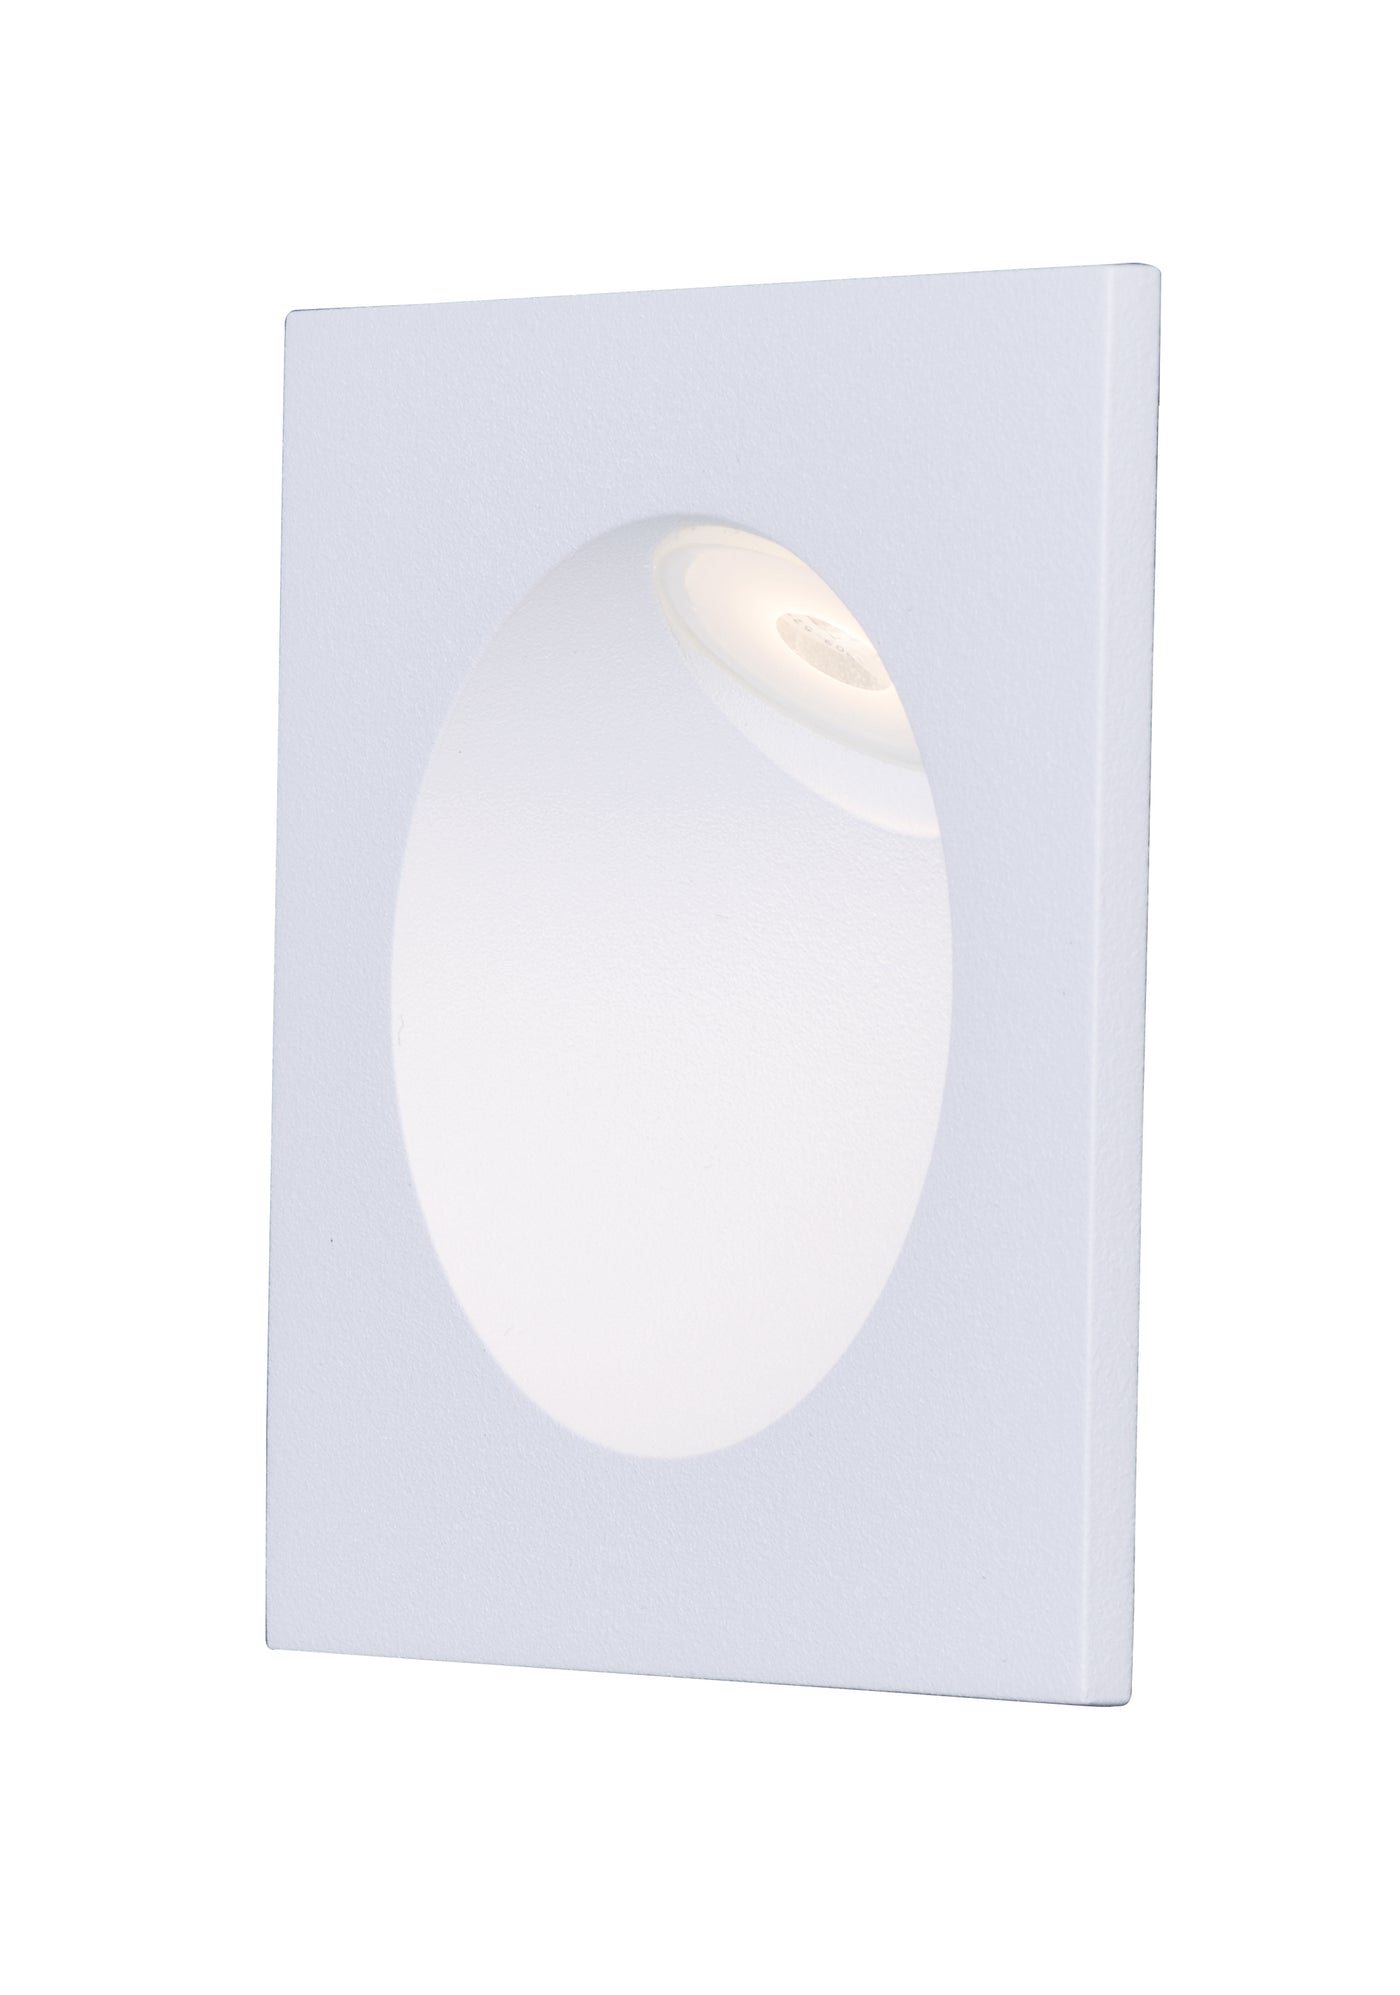  Alumilux LED Low Voltage Step Light E41403-WT Wall Sconce